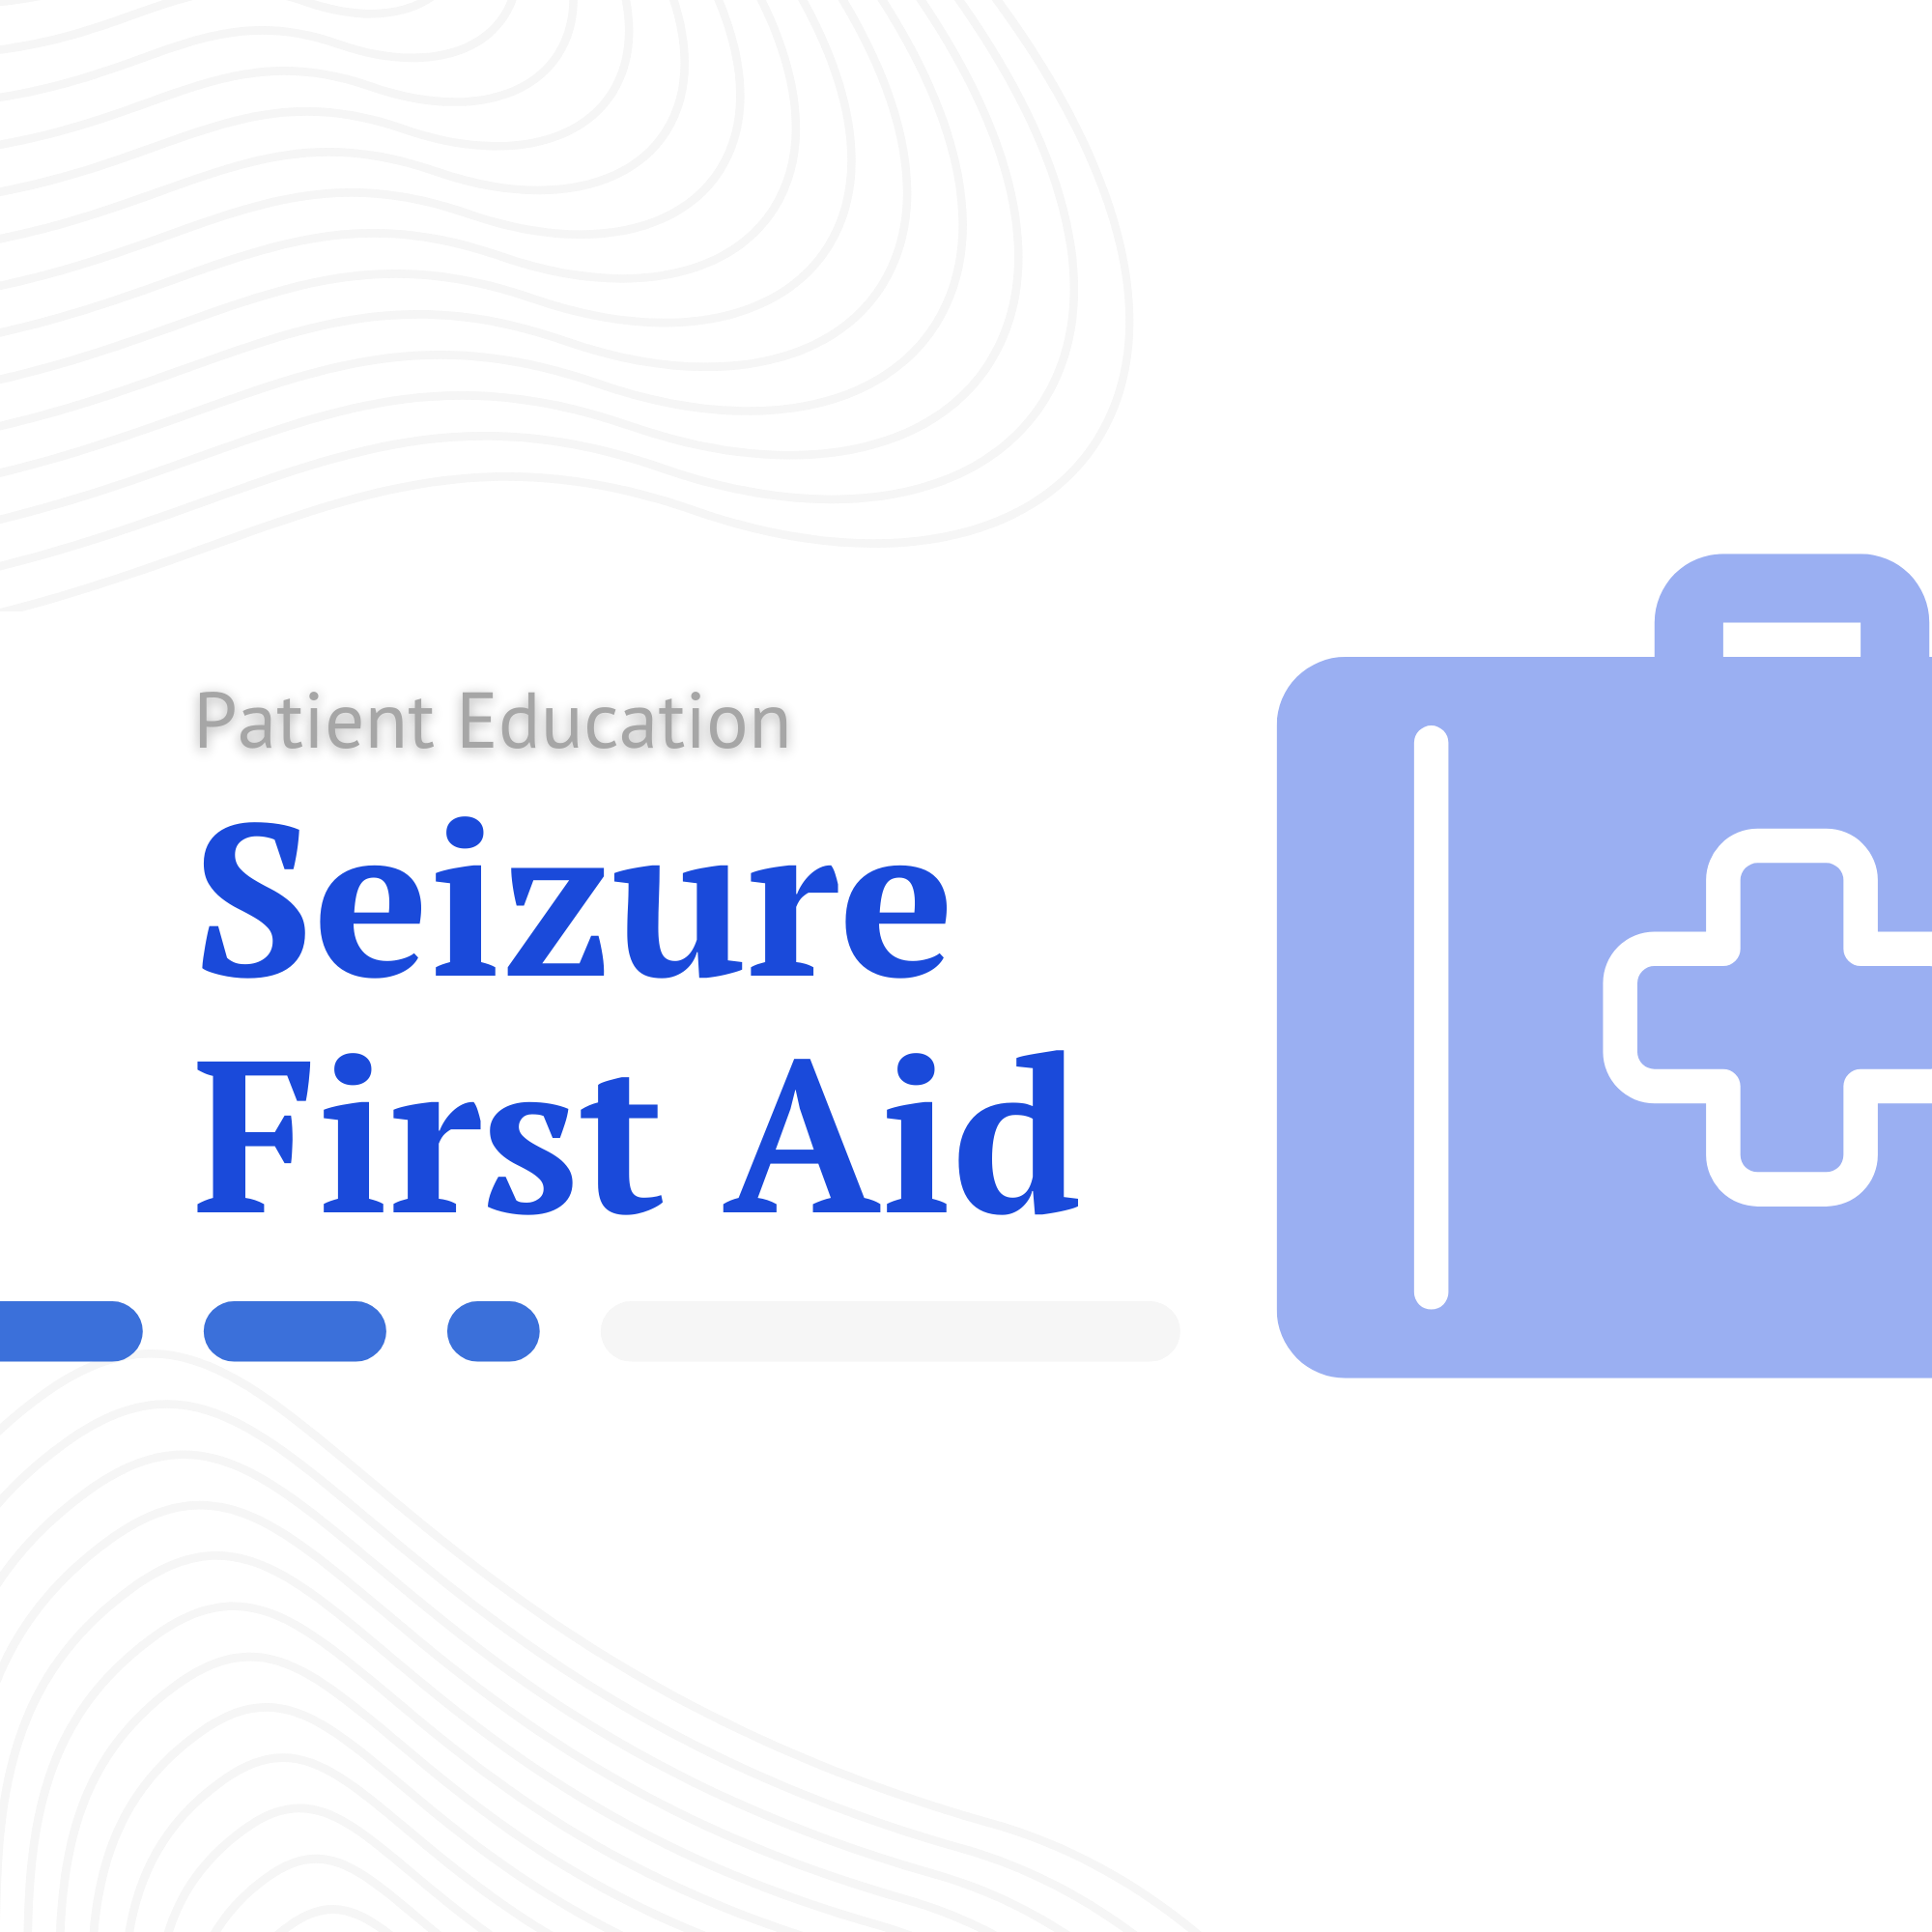 Seizure First Aid Cover SVG.png